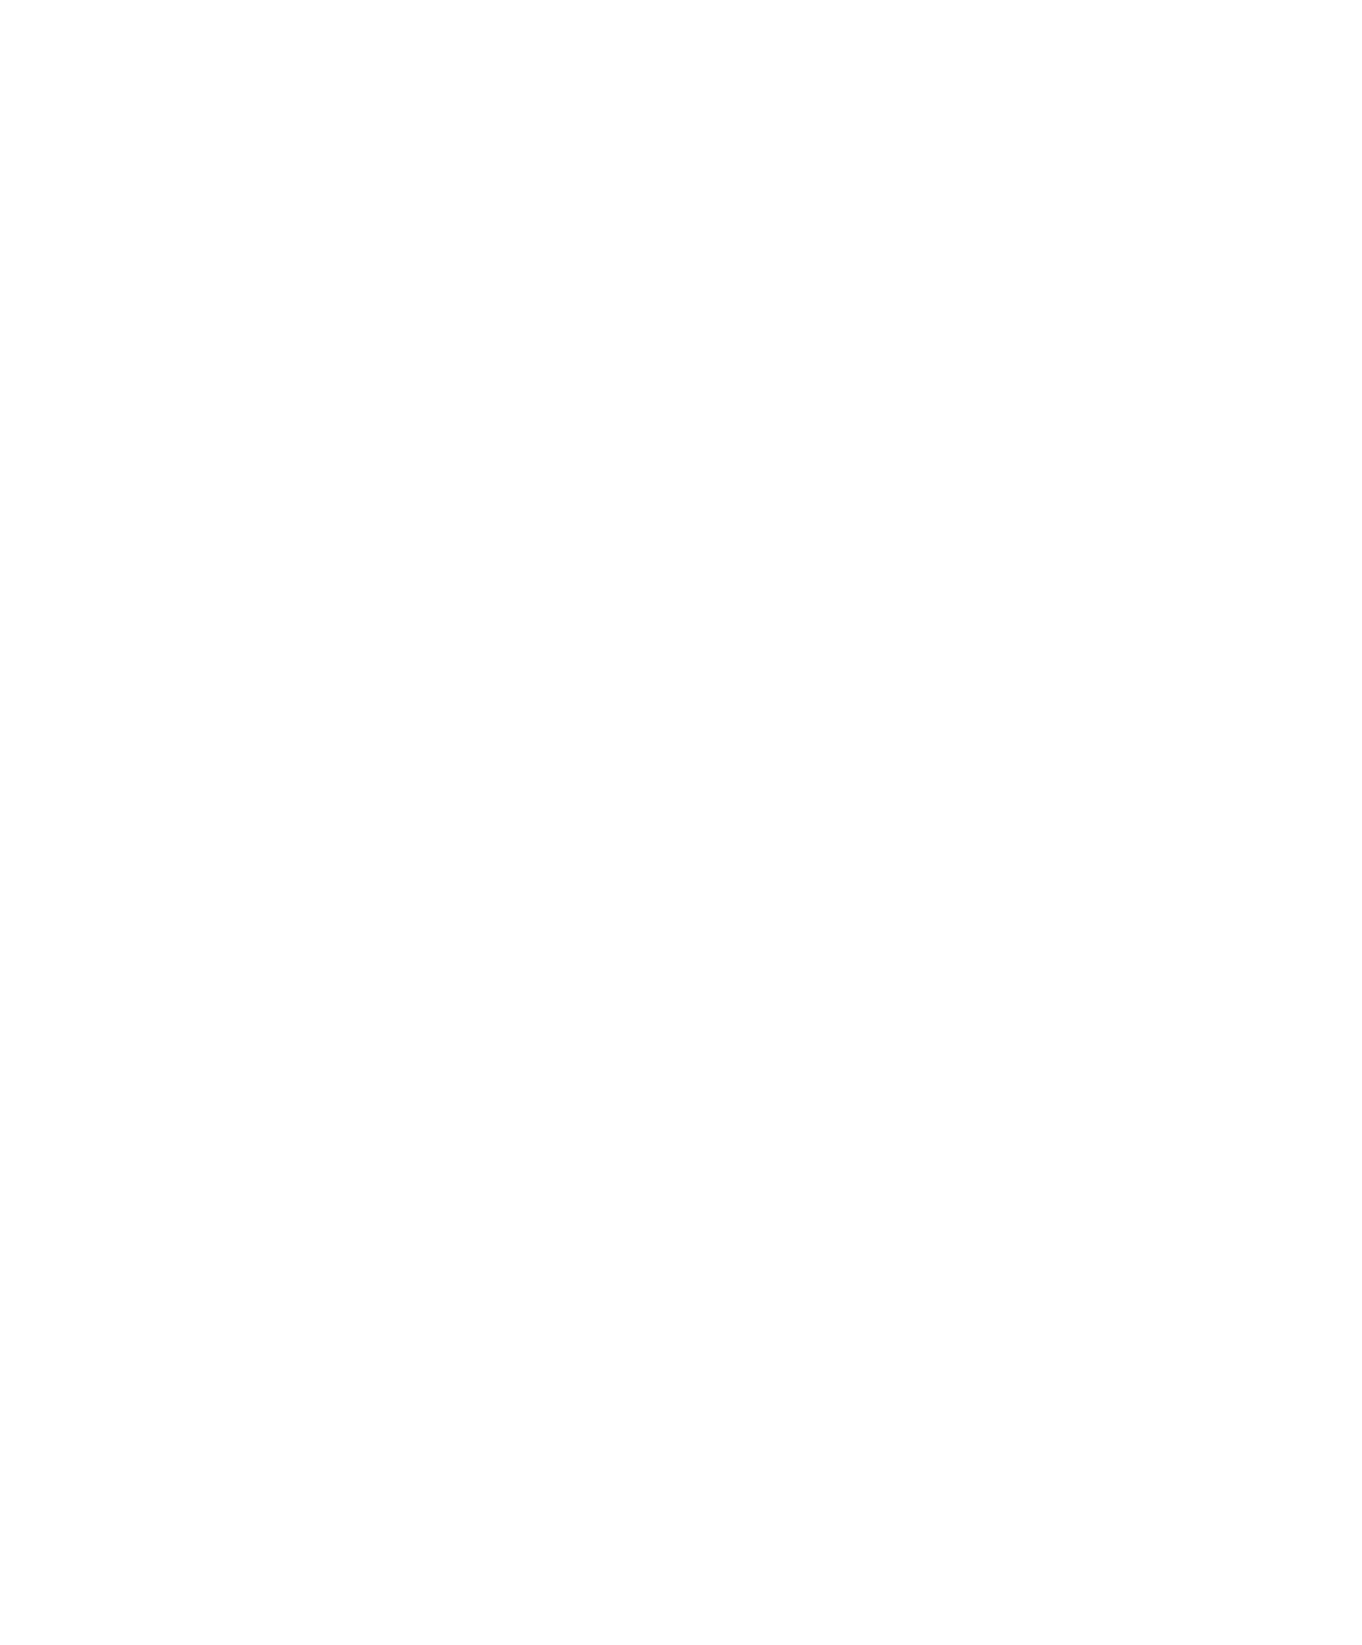 Intuitive Horse